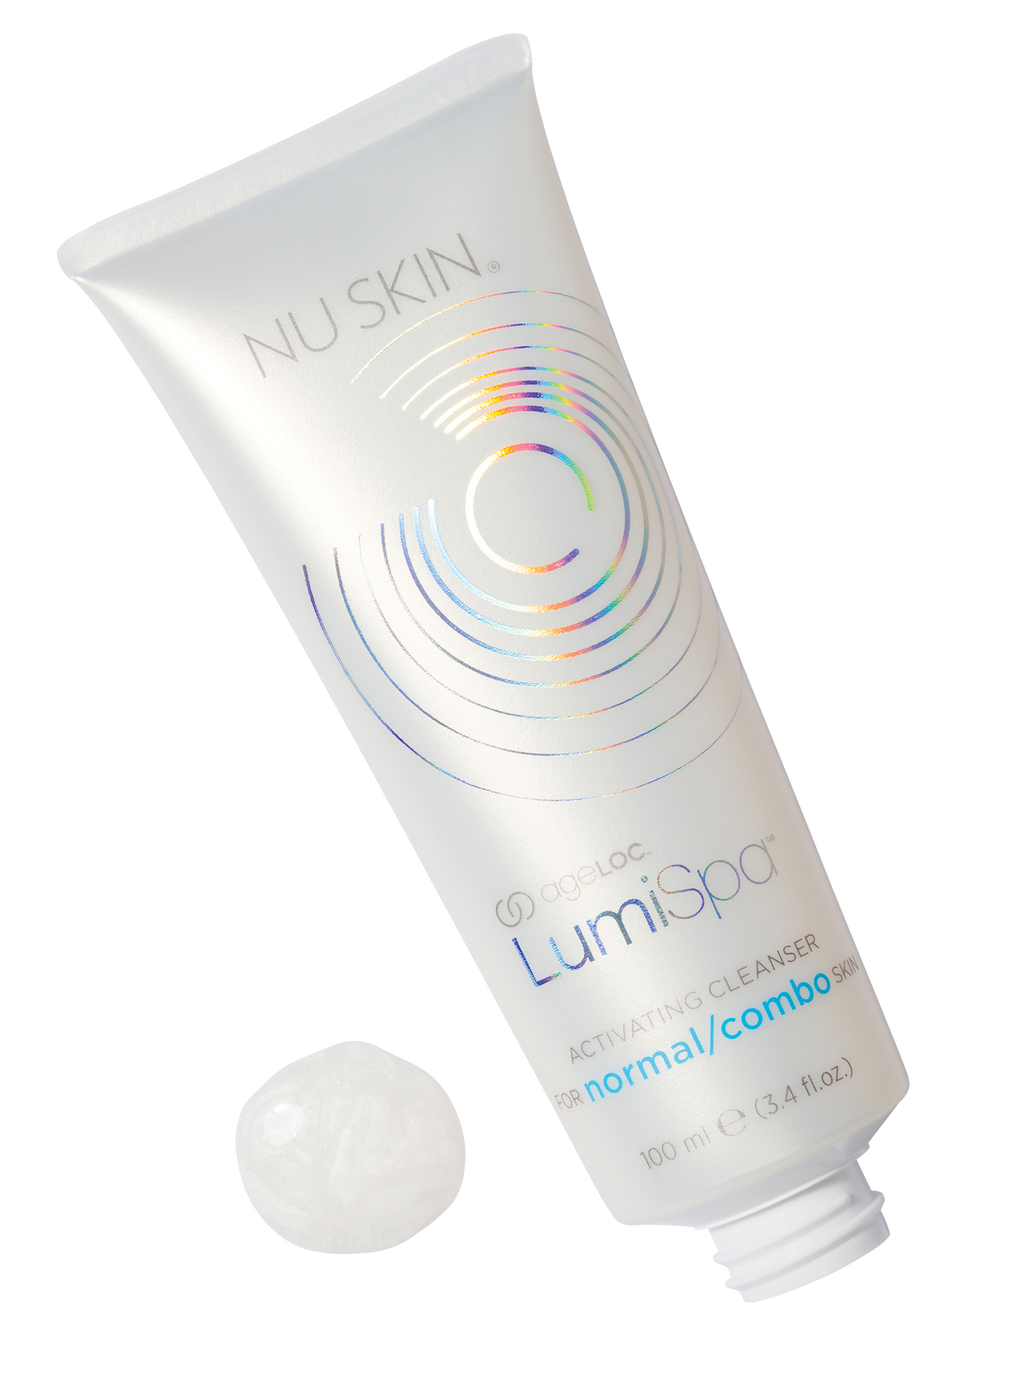 Nuskin Nu Skin Ageloc Lumispa Treatment Cleanser for Normal /Combo